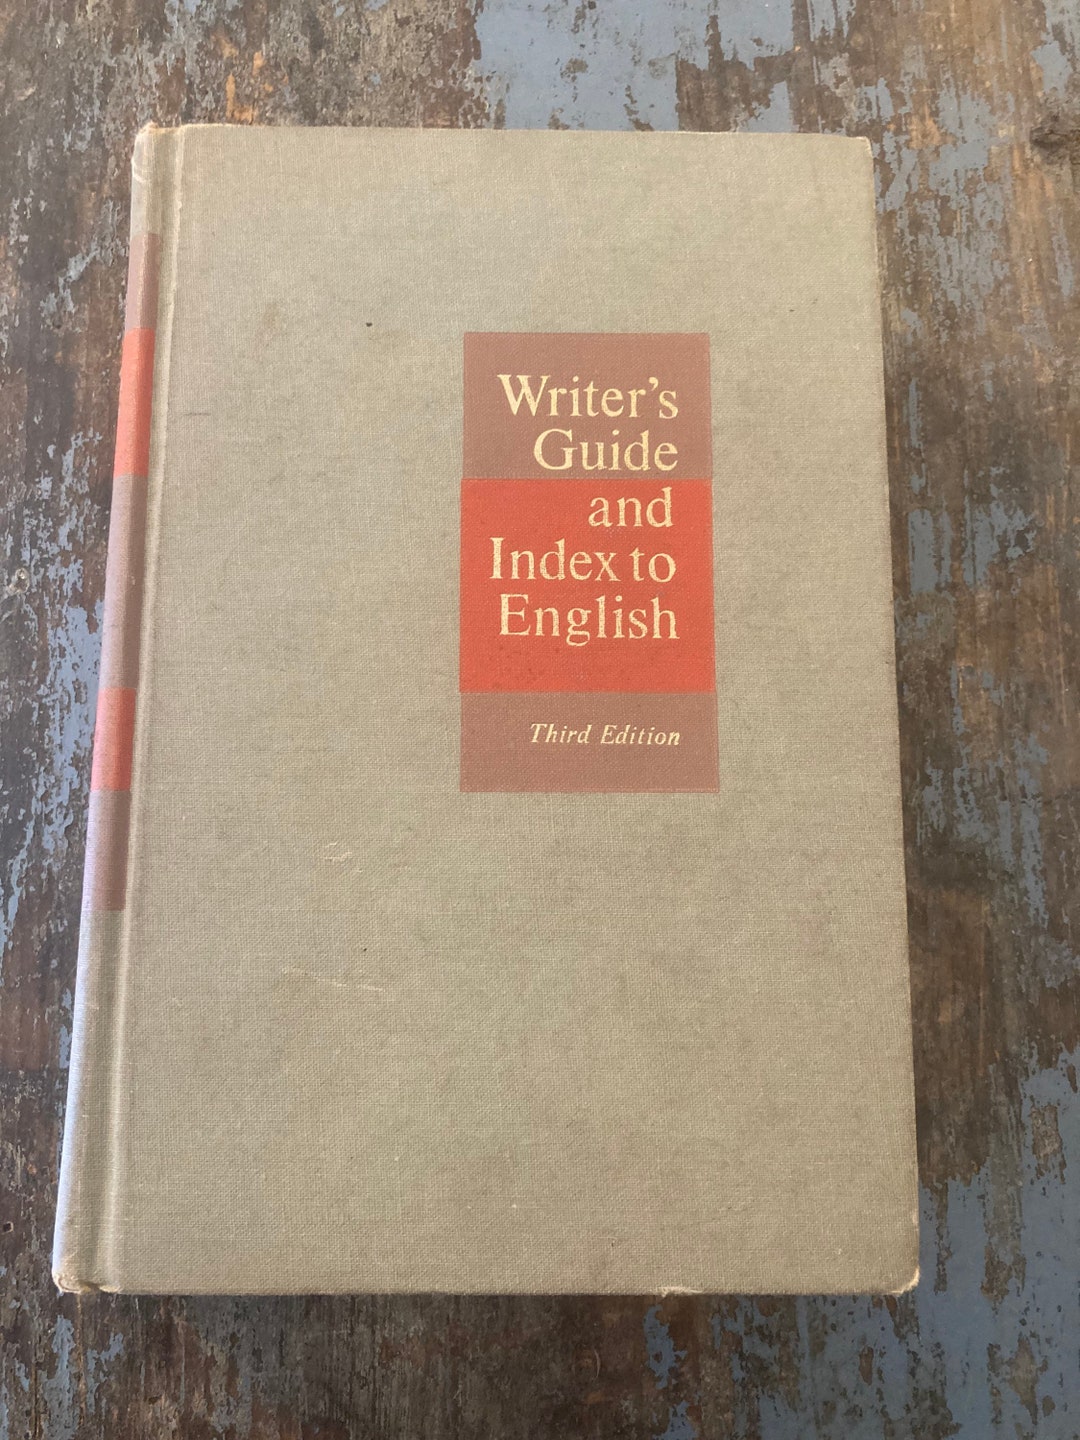 India　to　Index　Writer's　Buy　and　Guide　in　Online　English.　1959.　Grammar　English　Etsy